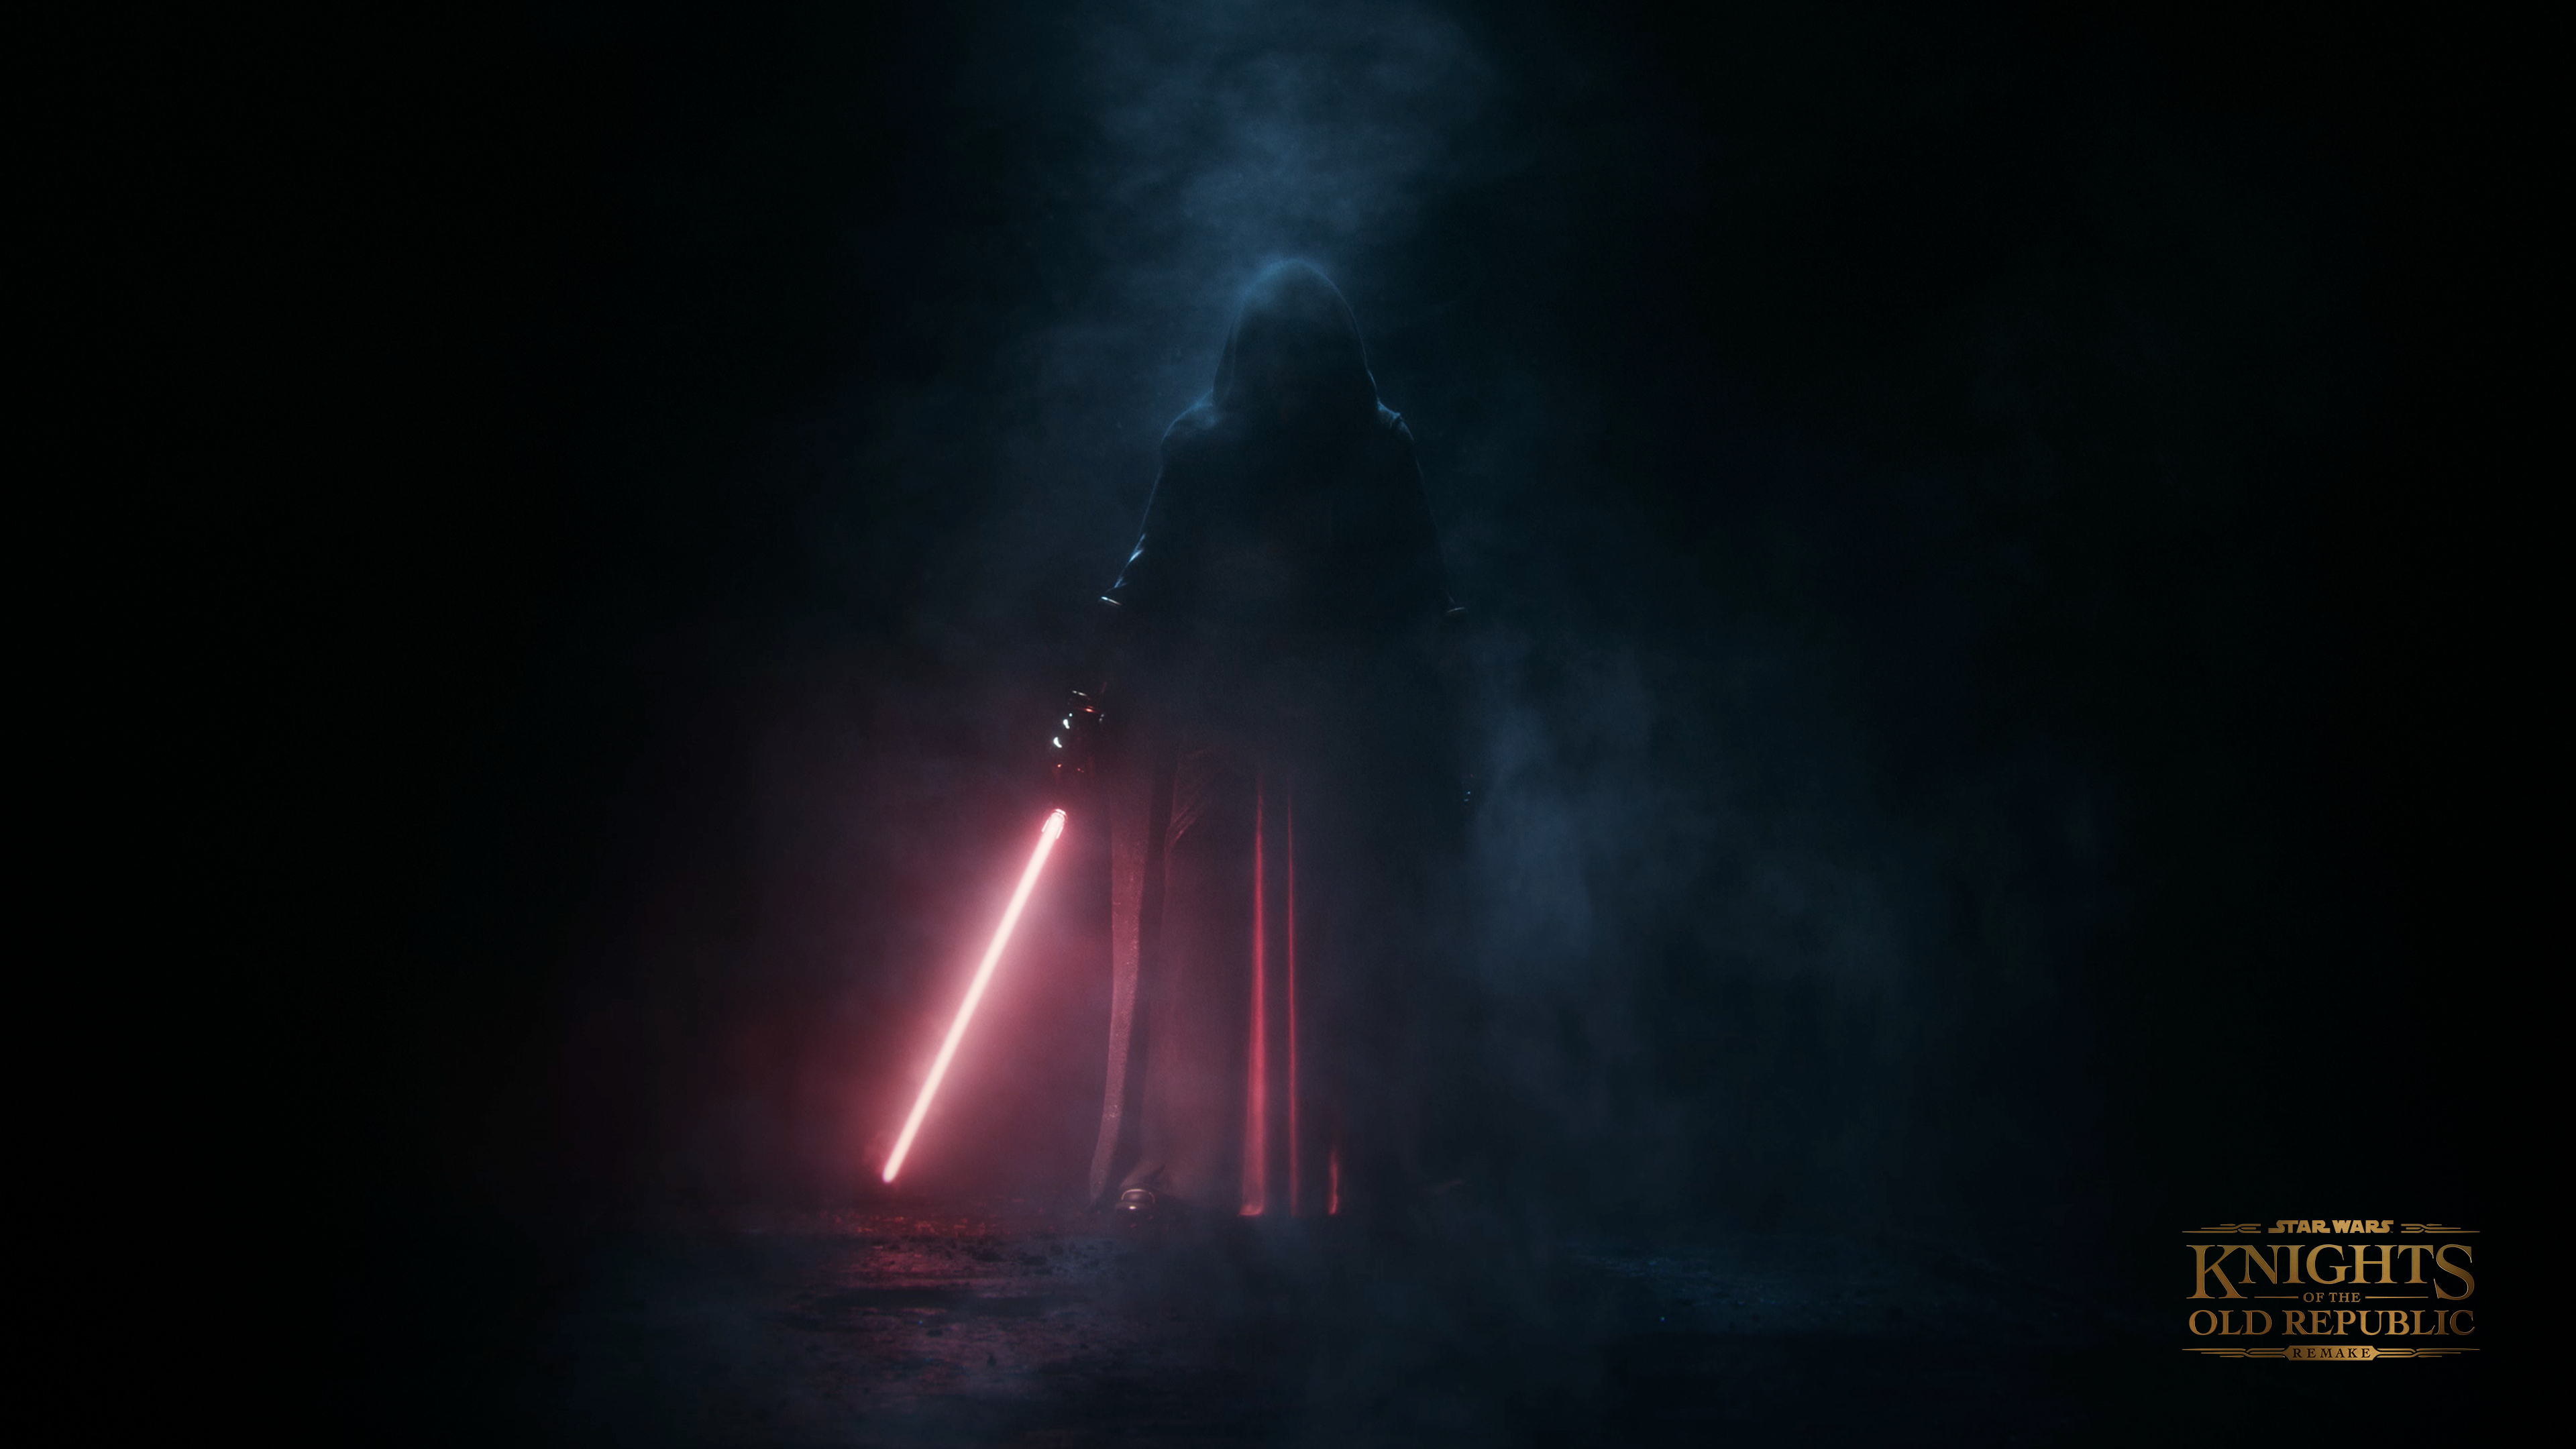 A cloaked figure stands in the shadows wielding a red lighsaber